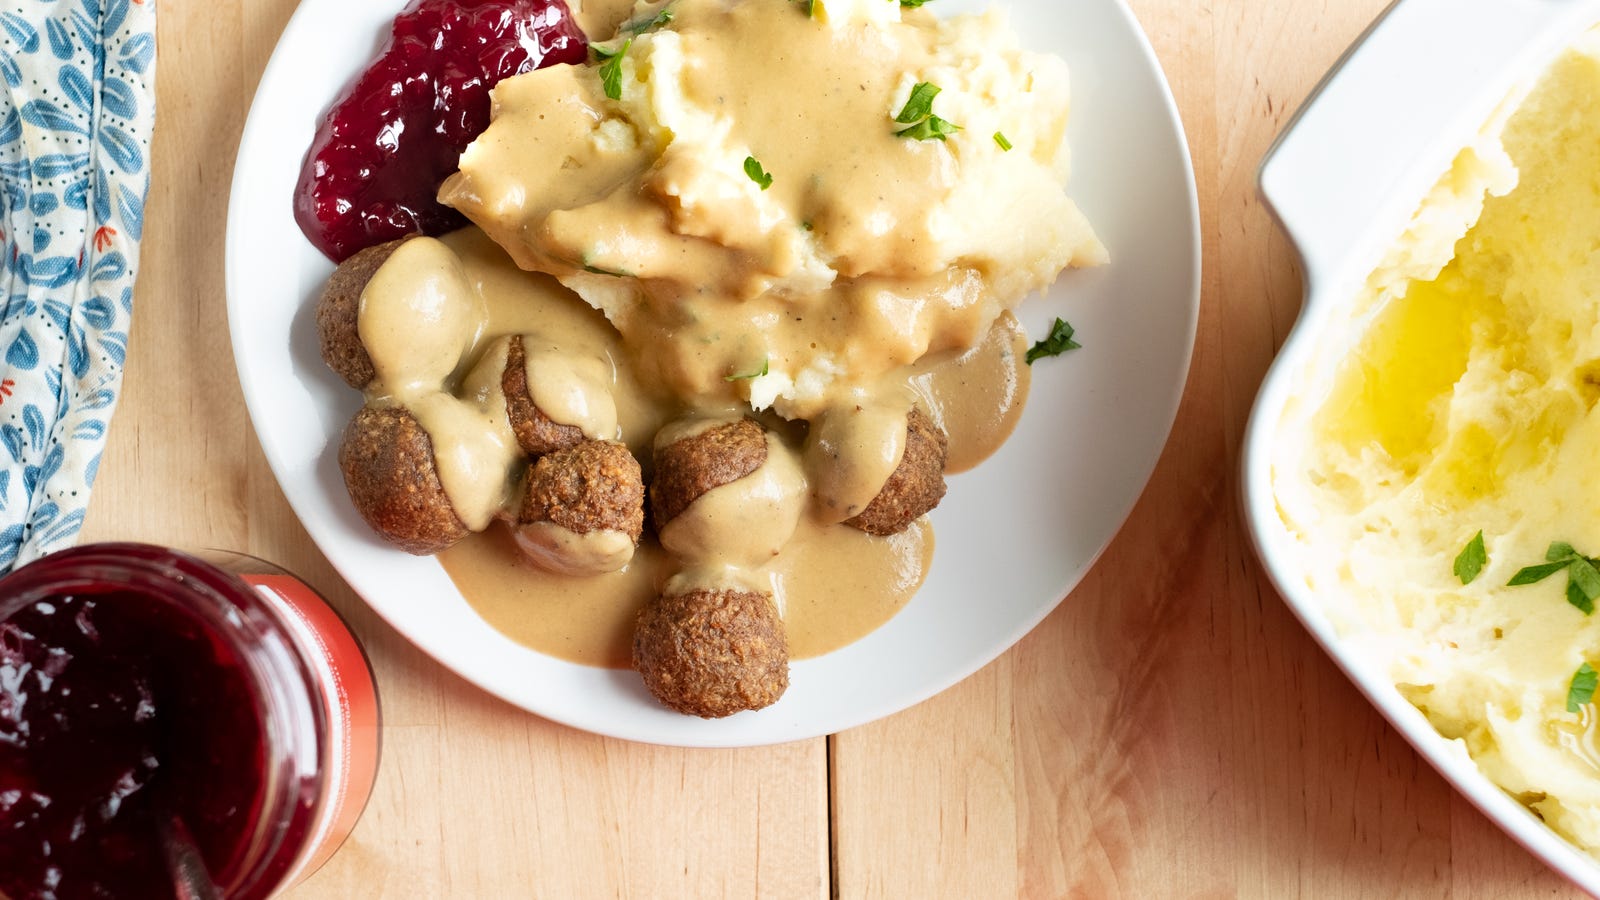 How To Make Your Own Vegan IKEA-Style Meatballs